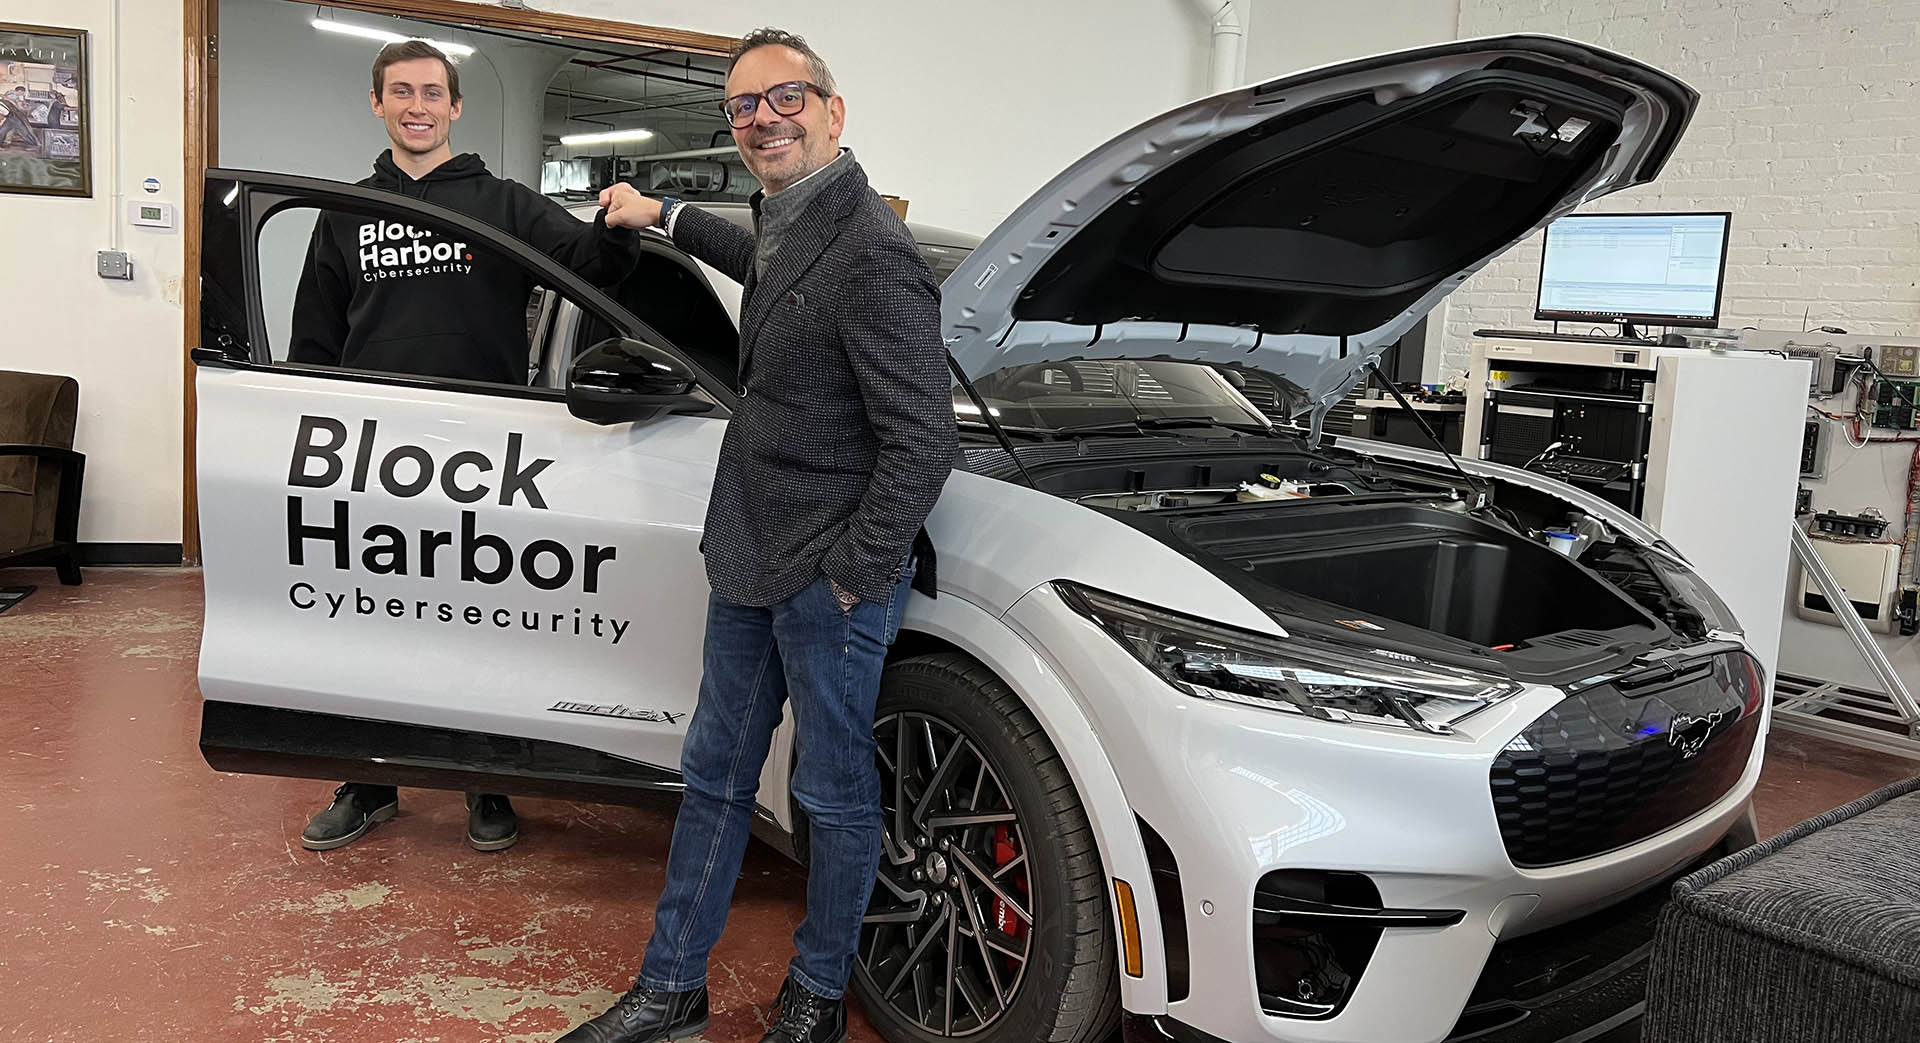 Reinova & Block Harbor Cybersecurity announce official partnership to further vehicle cybersecurity development within automotive